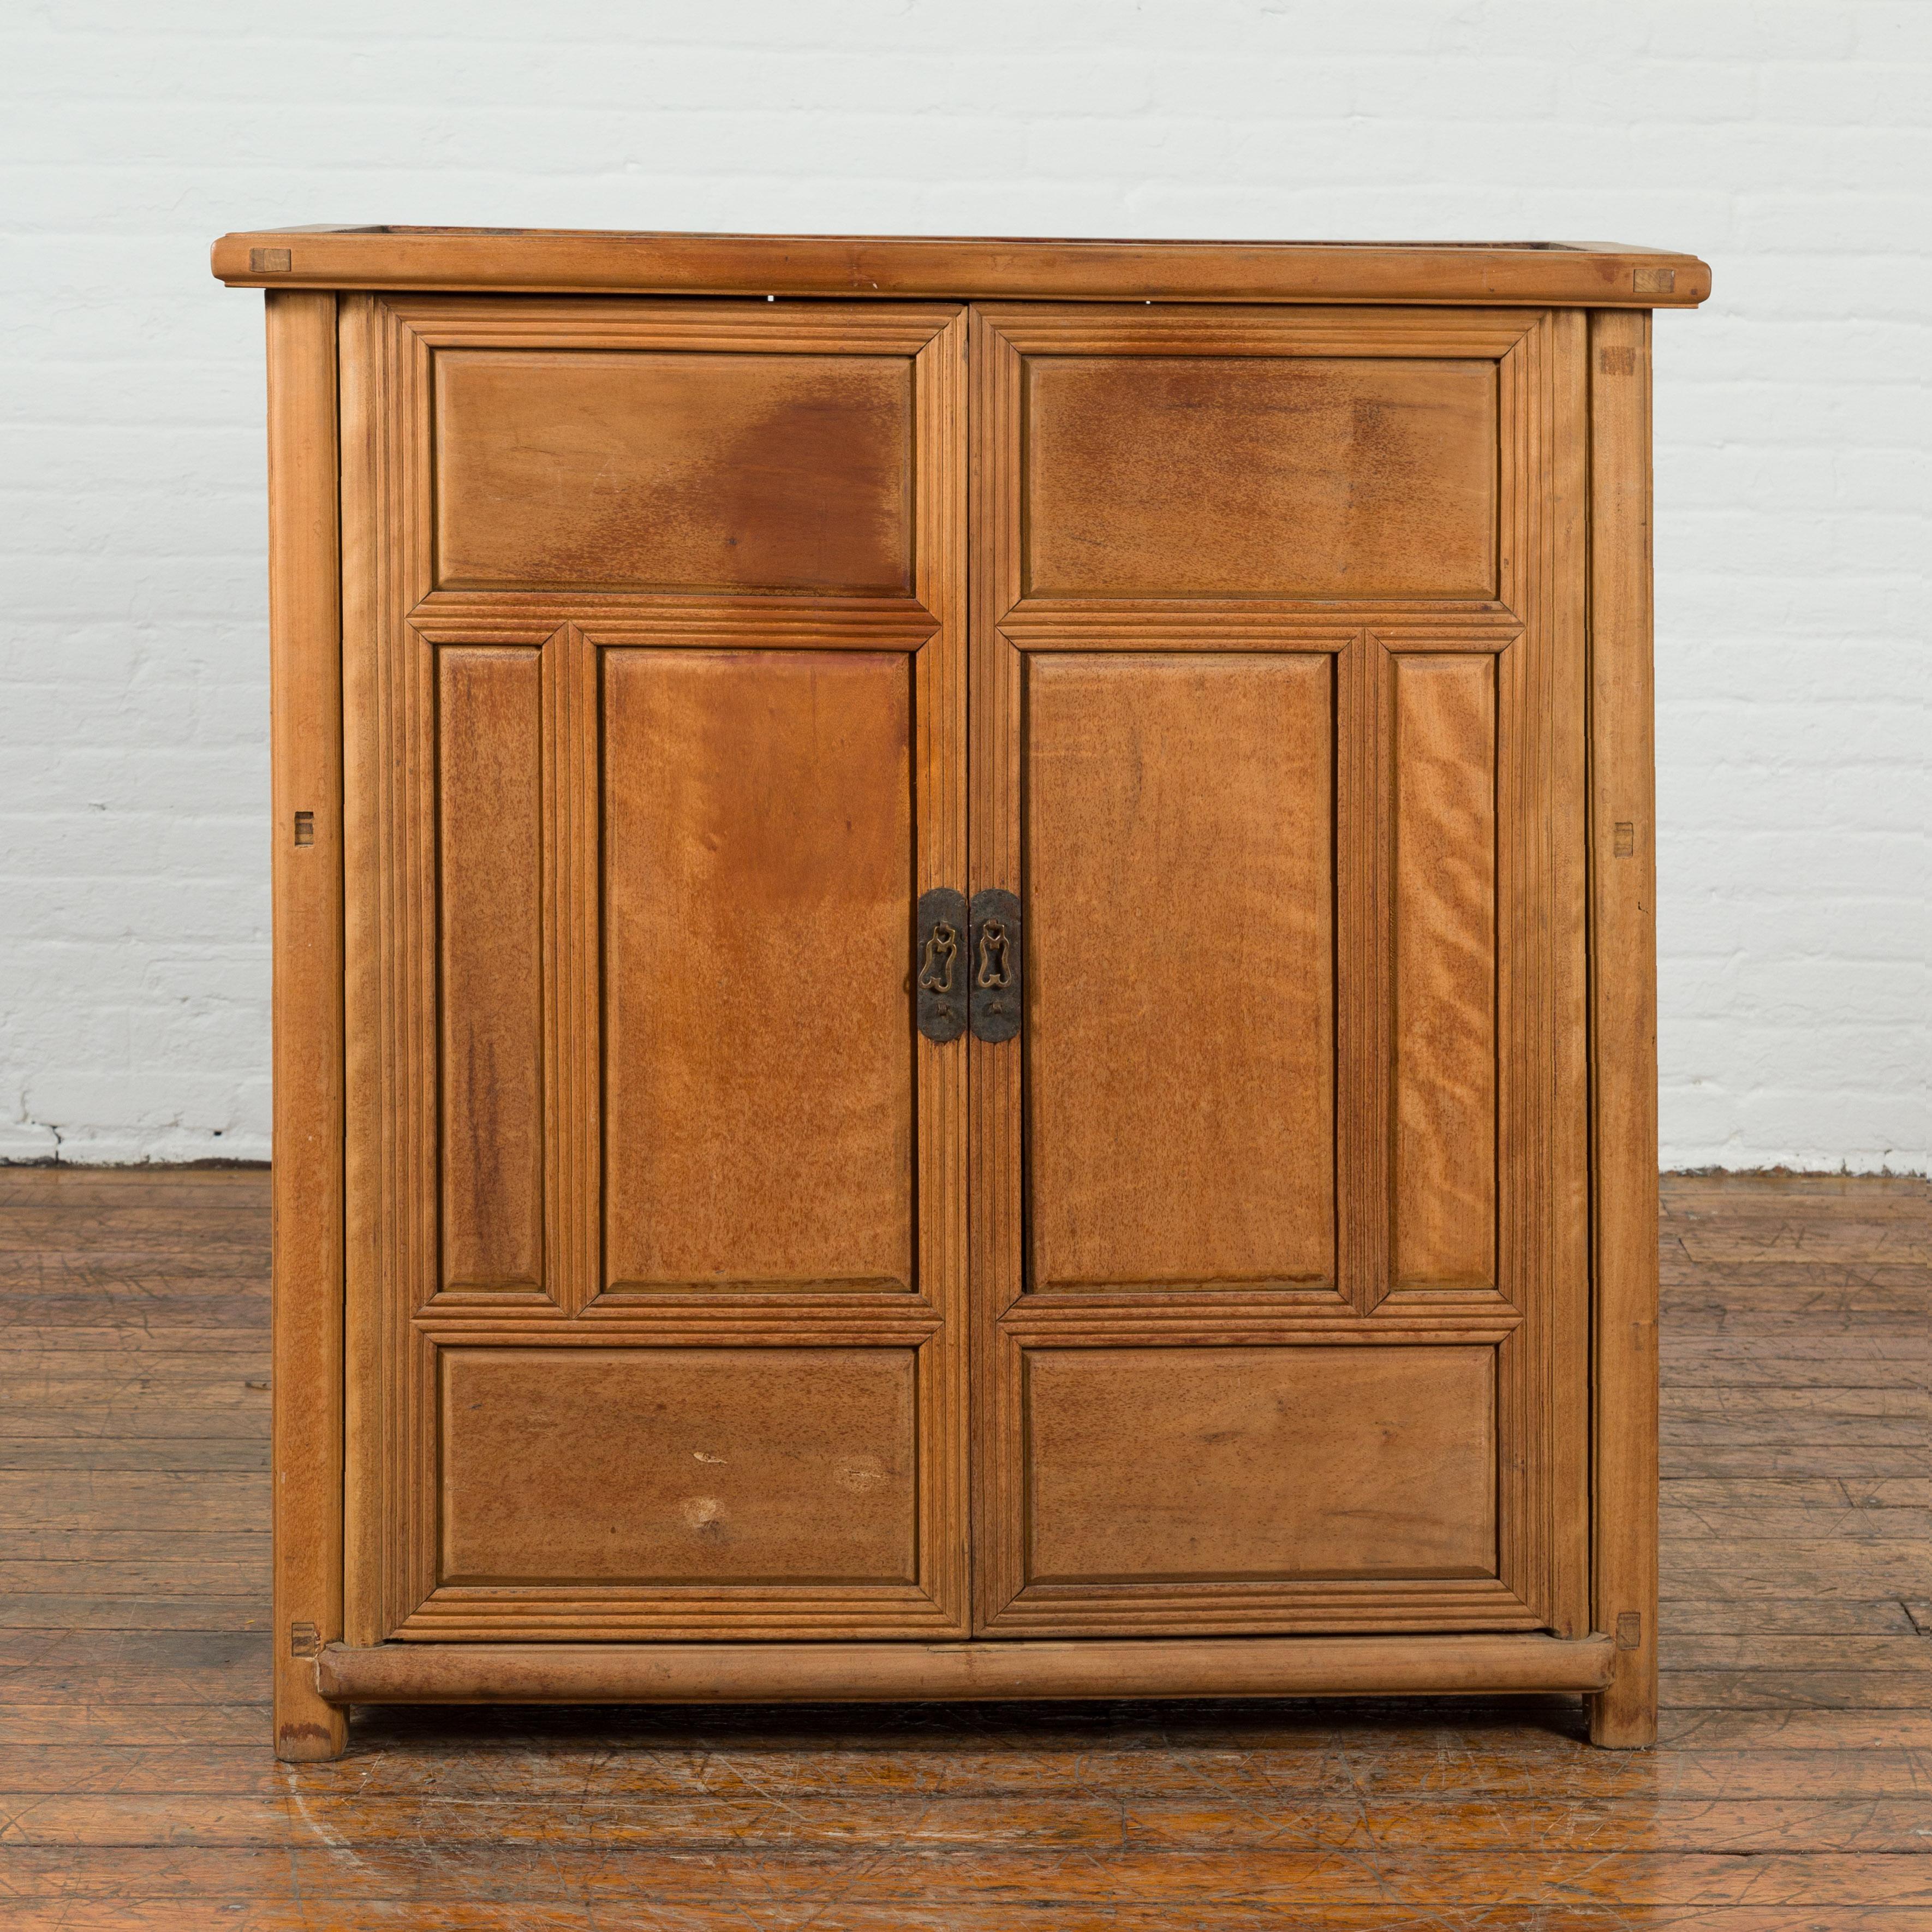 A Chinese vintage natural wood finish cabinet from the mid 20th century with two doors and hidden drawers. Created in China during the midcentury period, this cabinet features a linear silhouette perfectly complimented by a natural wood finish. The